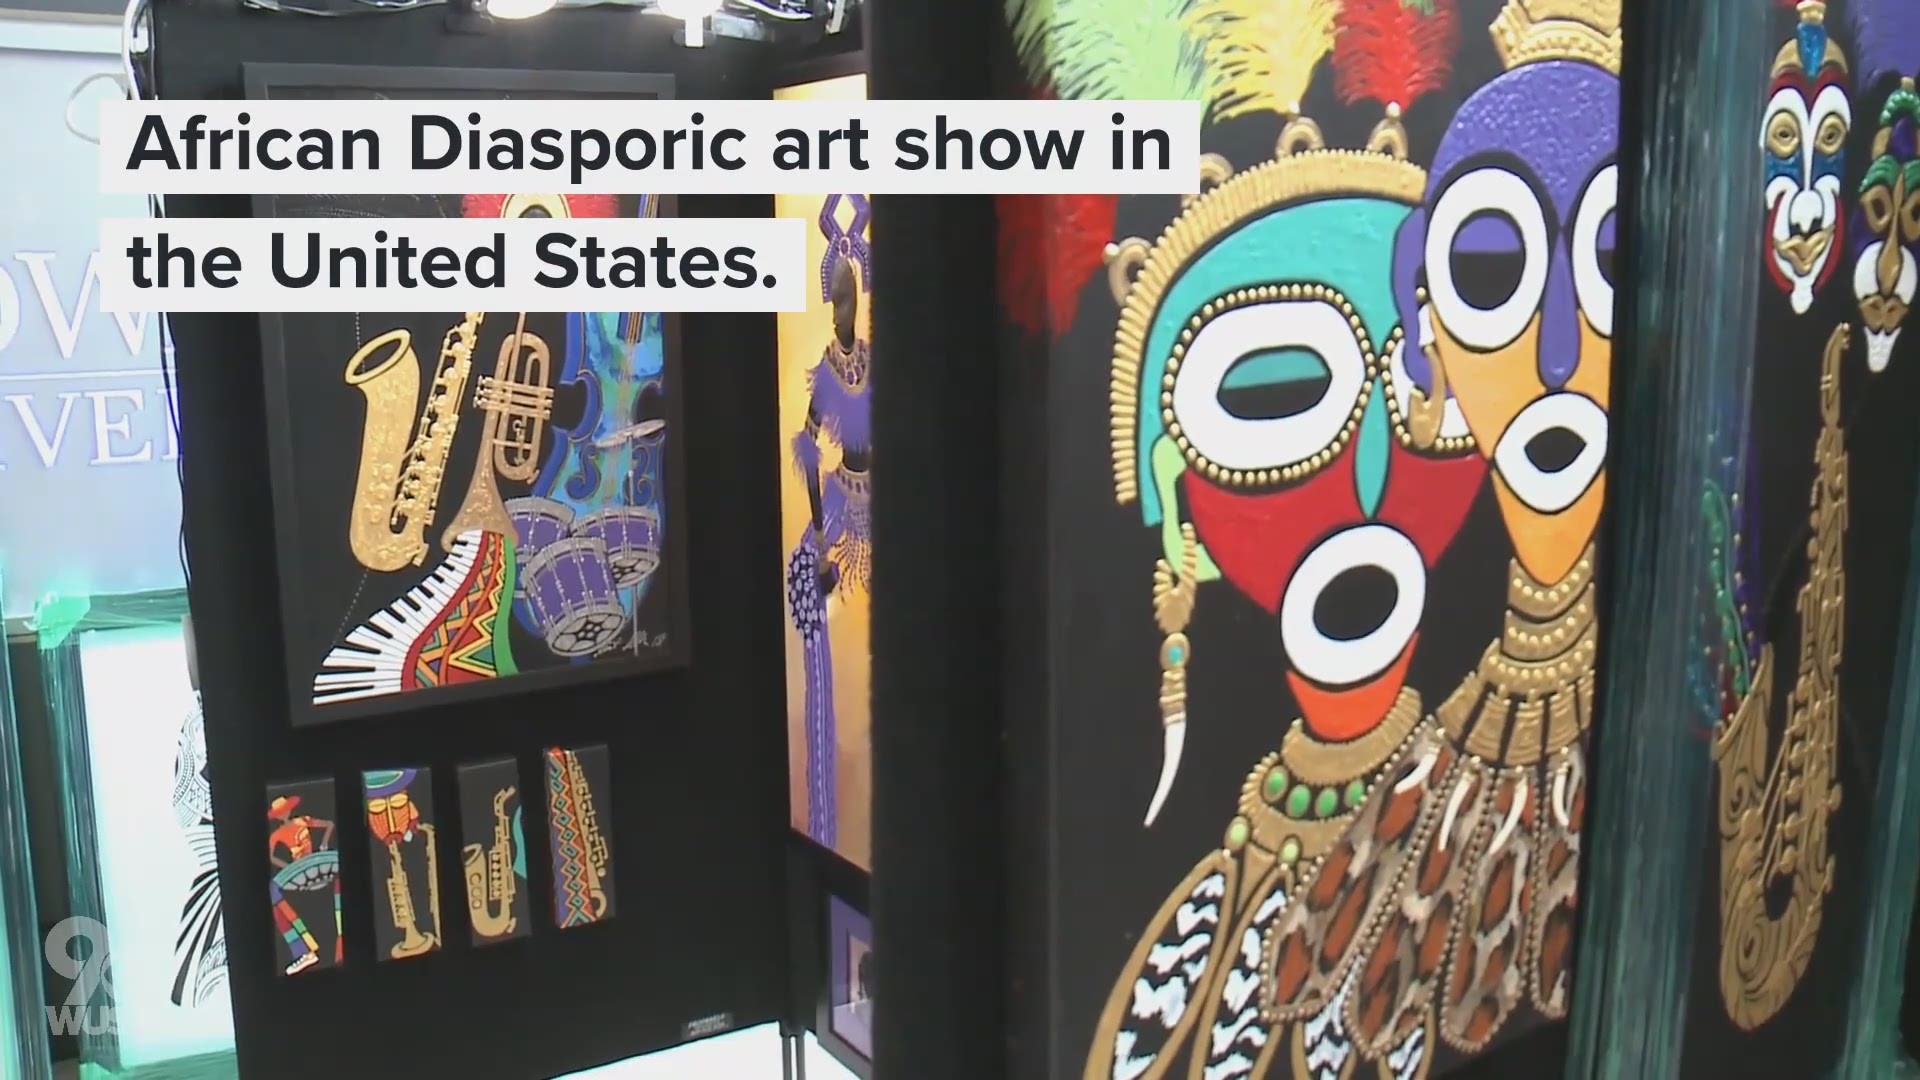 It's the tenth anniversary of the show, and it'll be at Howard University until Sunday.